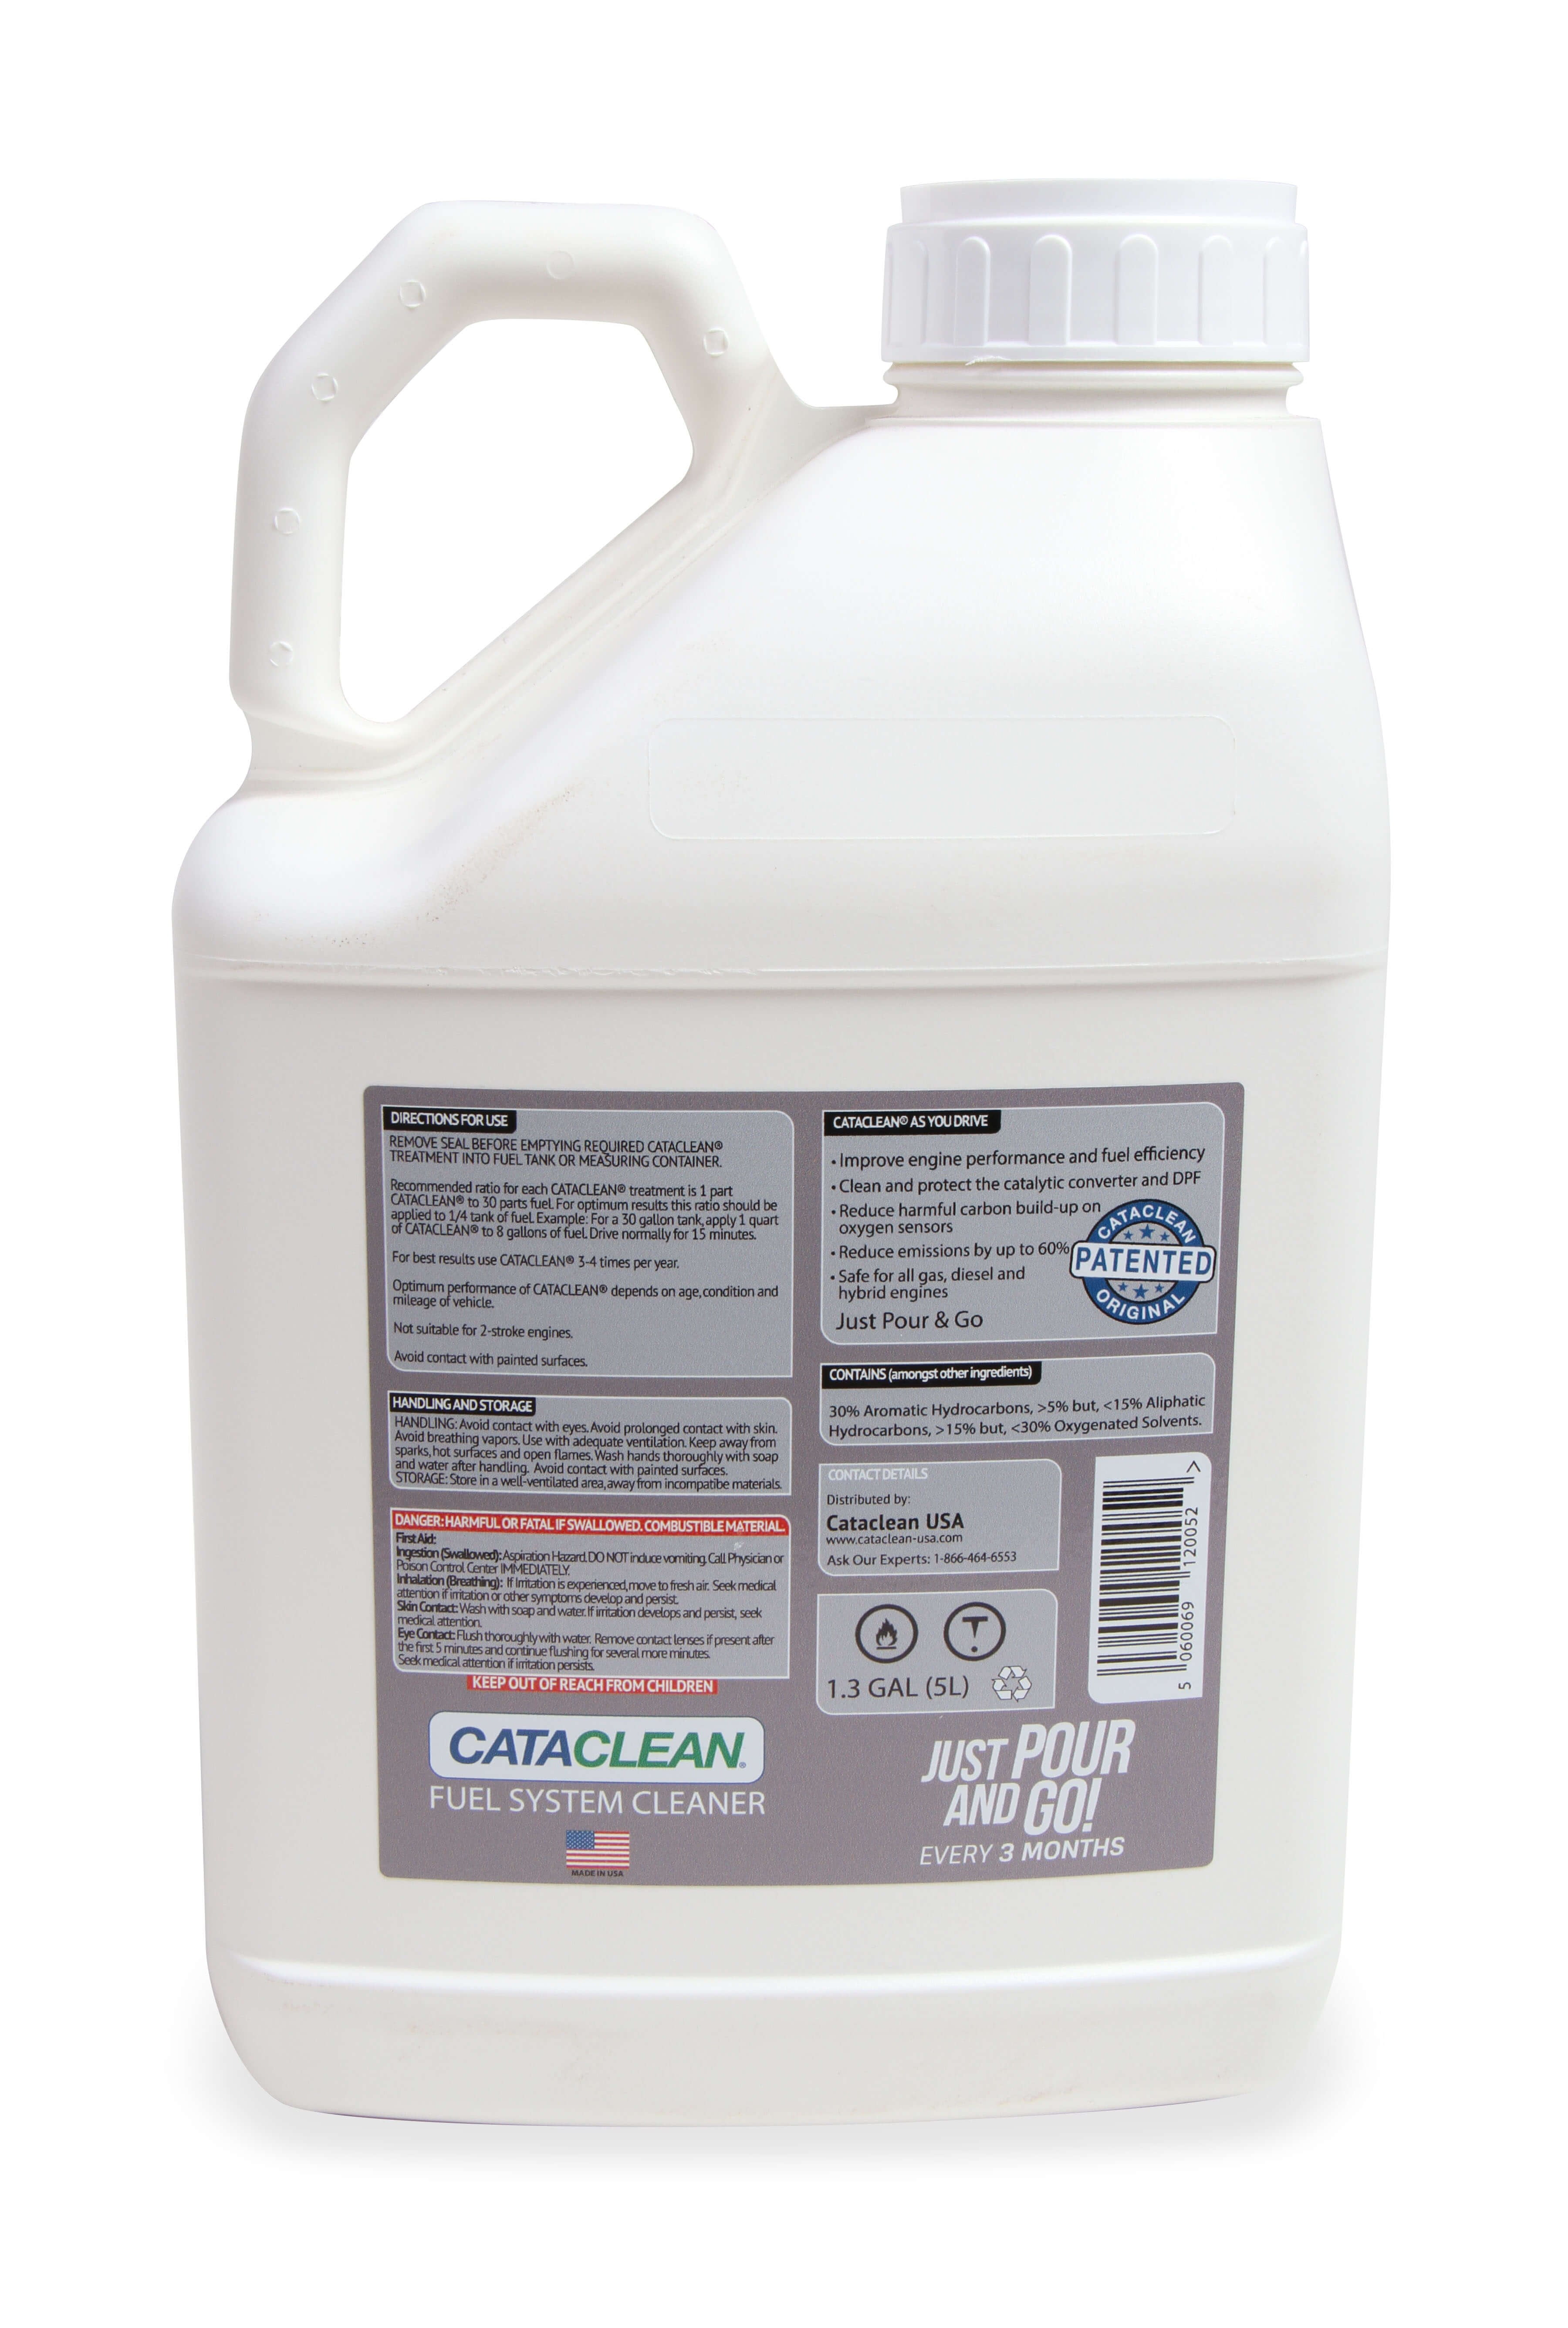 Cataclean - If you've used another fuel additive in the past and it didn't  work, you can use Cataclean's 8-in-1 Fuel and Exhaust System Cleaner to  help remove harmful carbon deposits. We